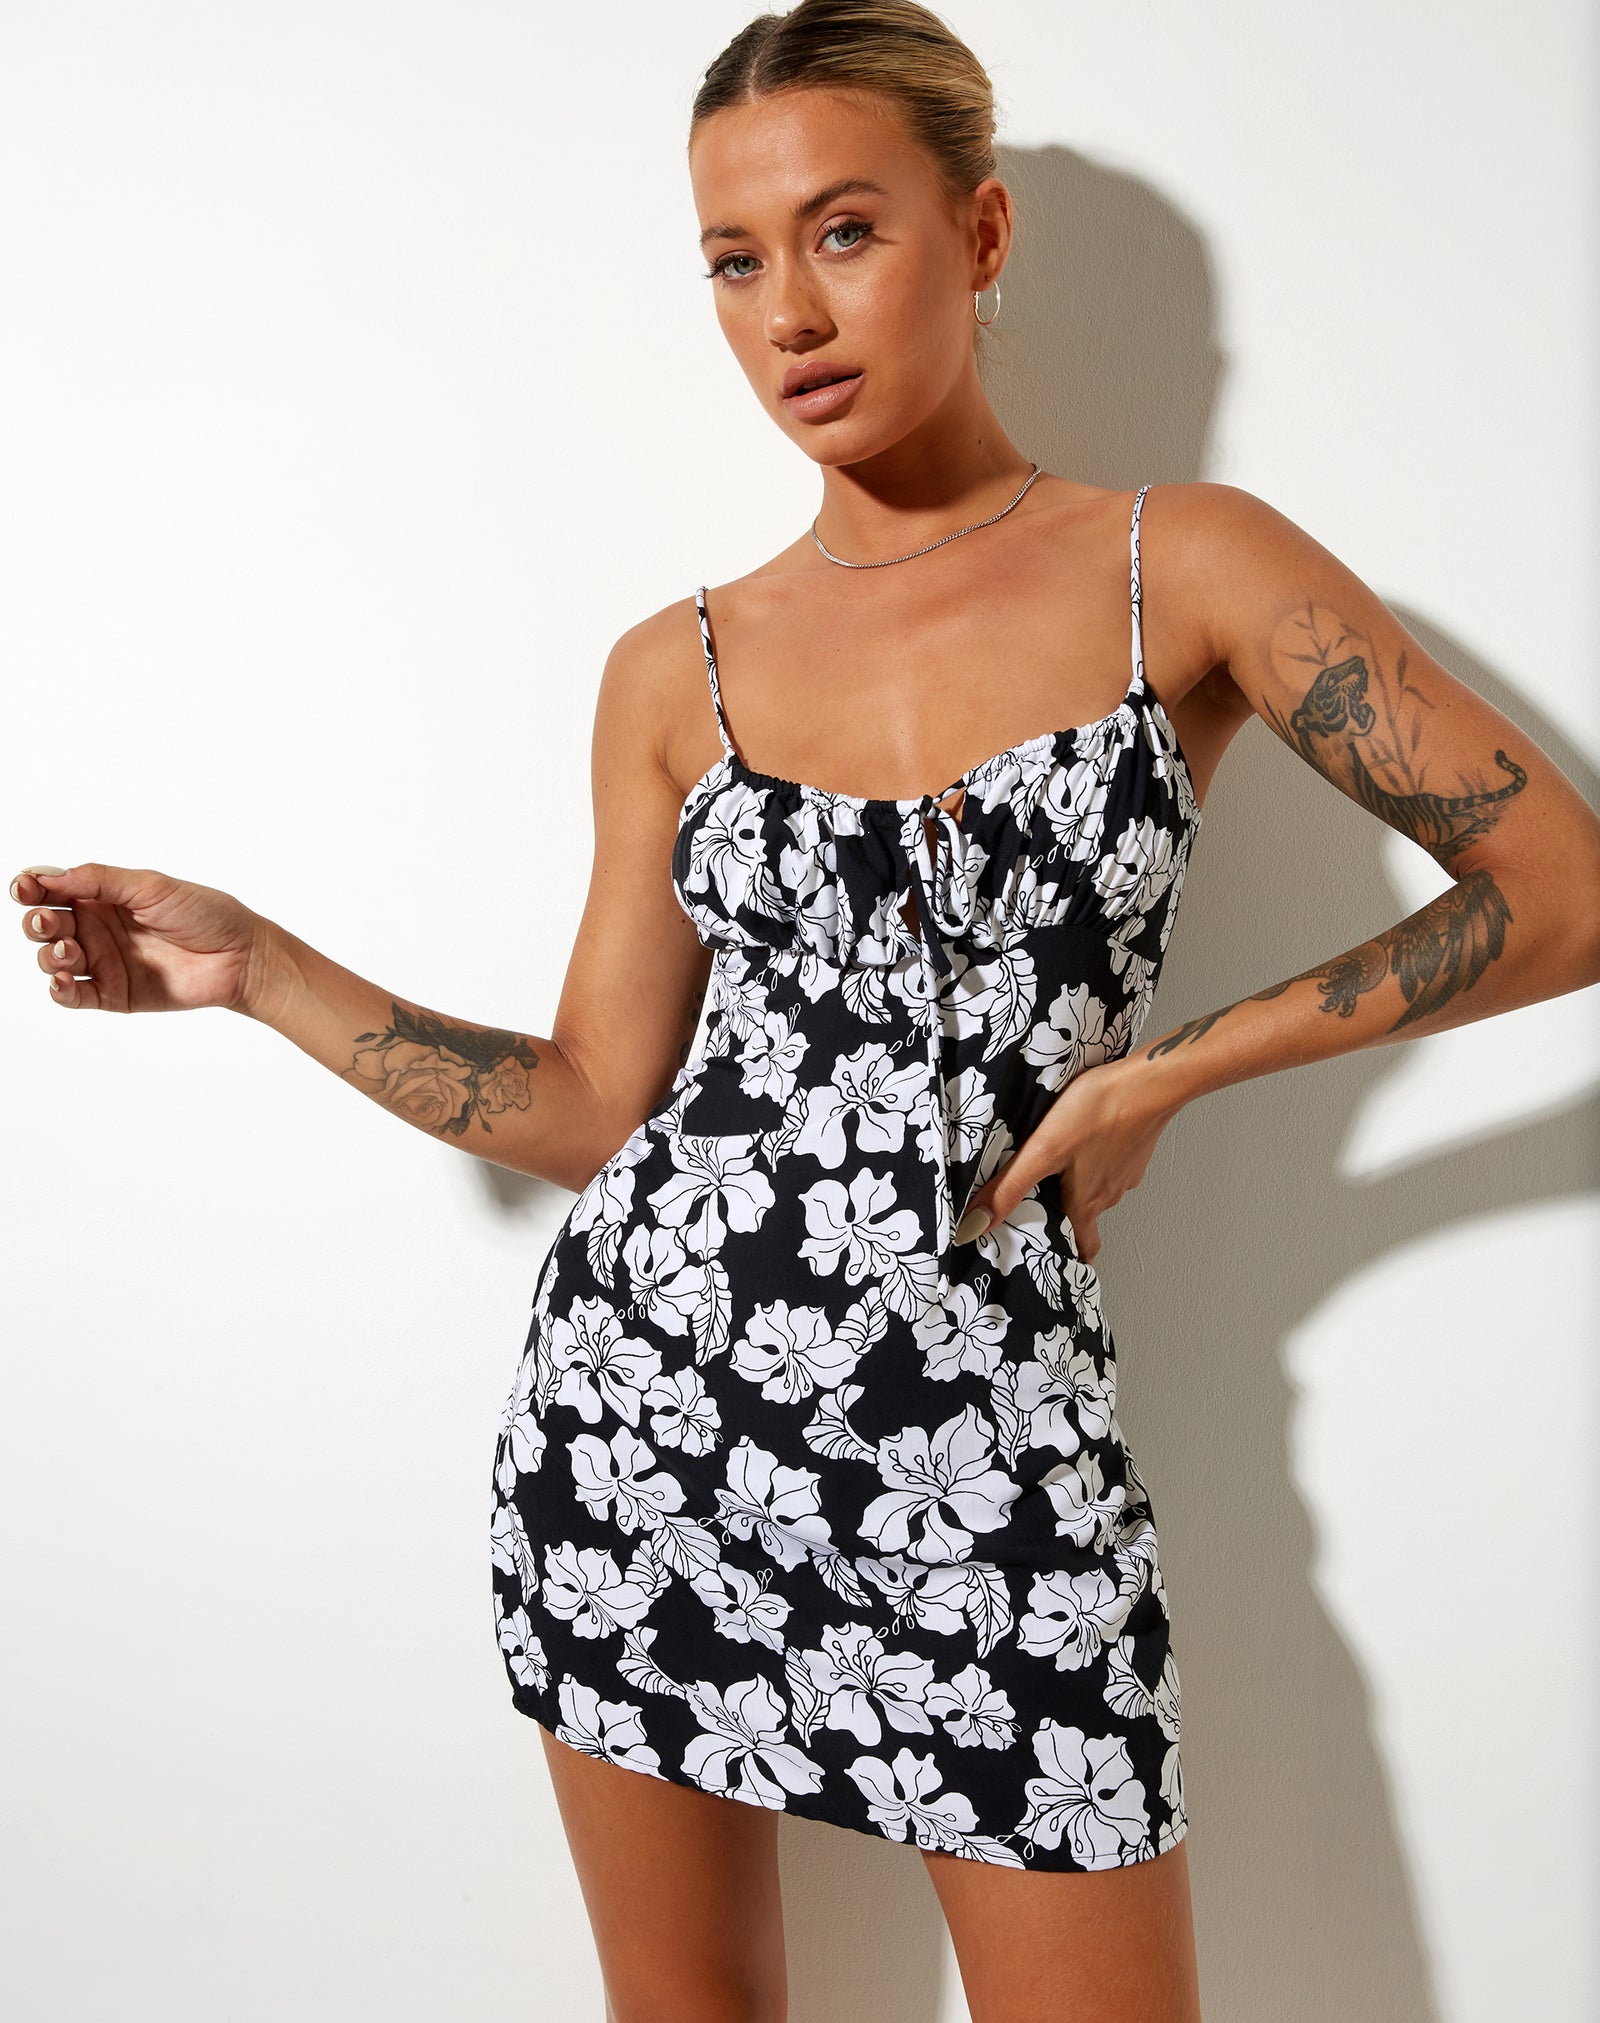 Black and White Floral Print Strappy ...